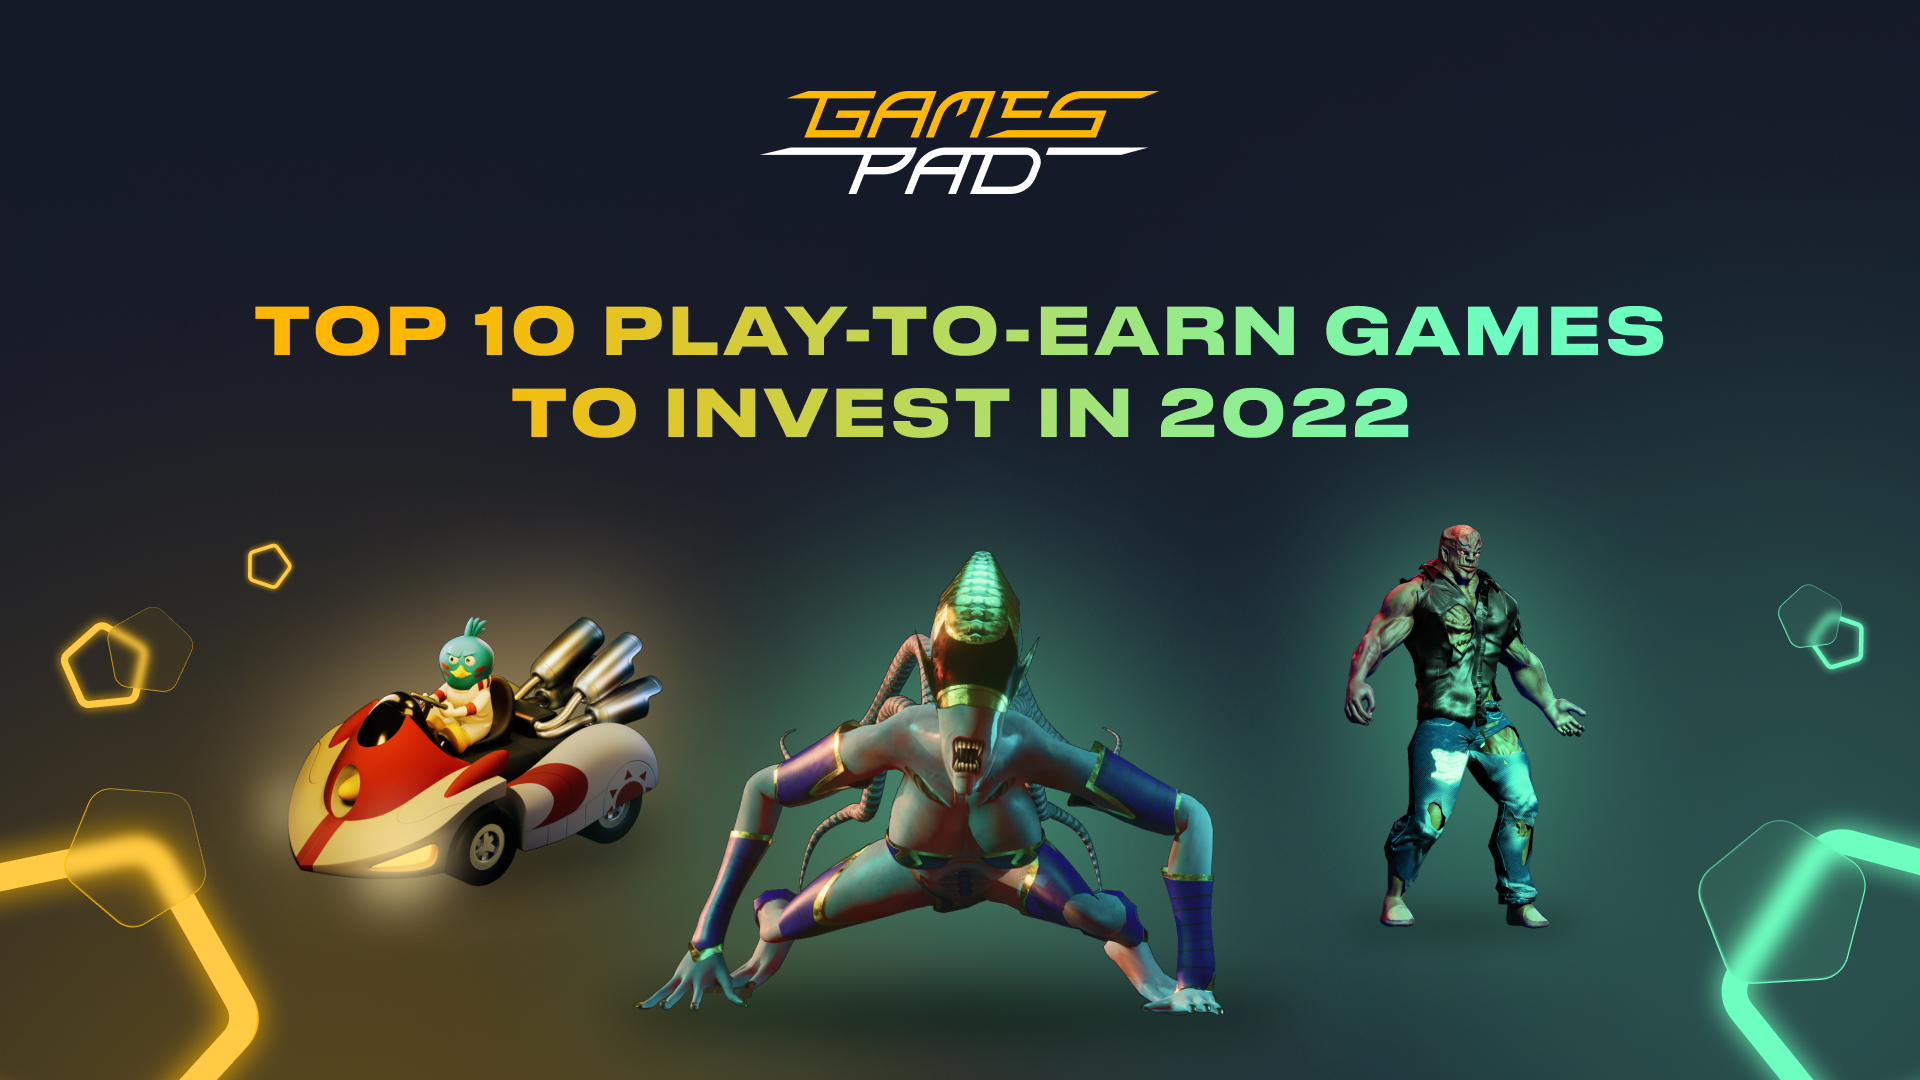 Top 10 Play-To-Earn Games To Invest In 2022